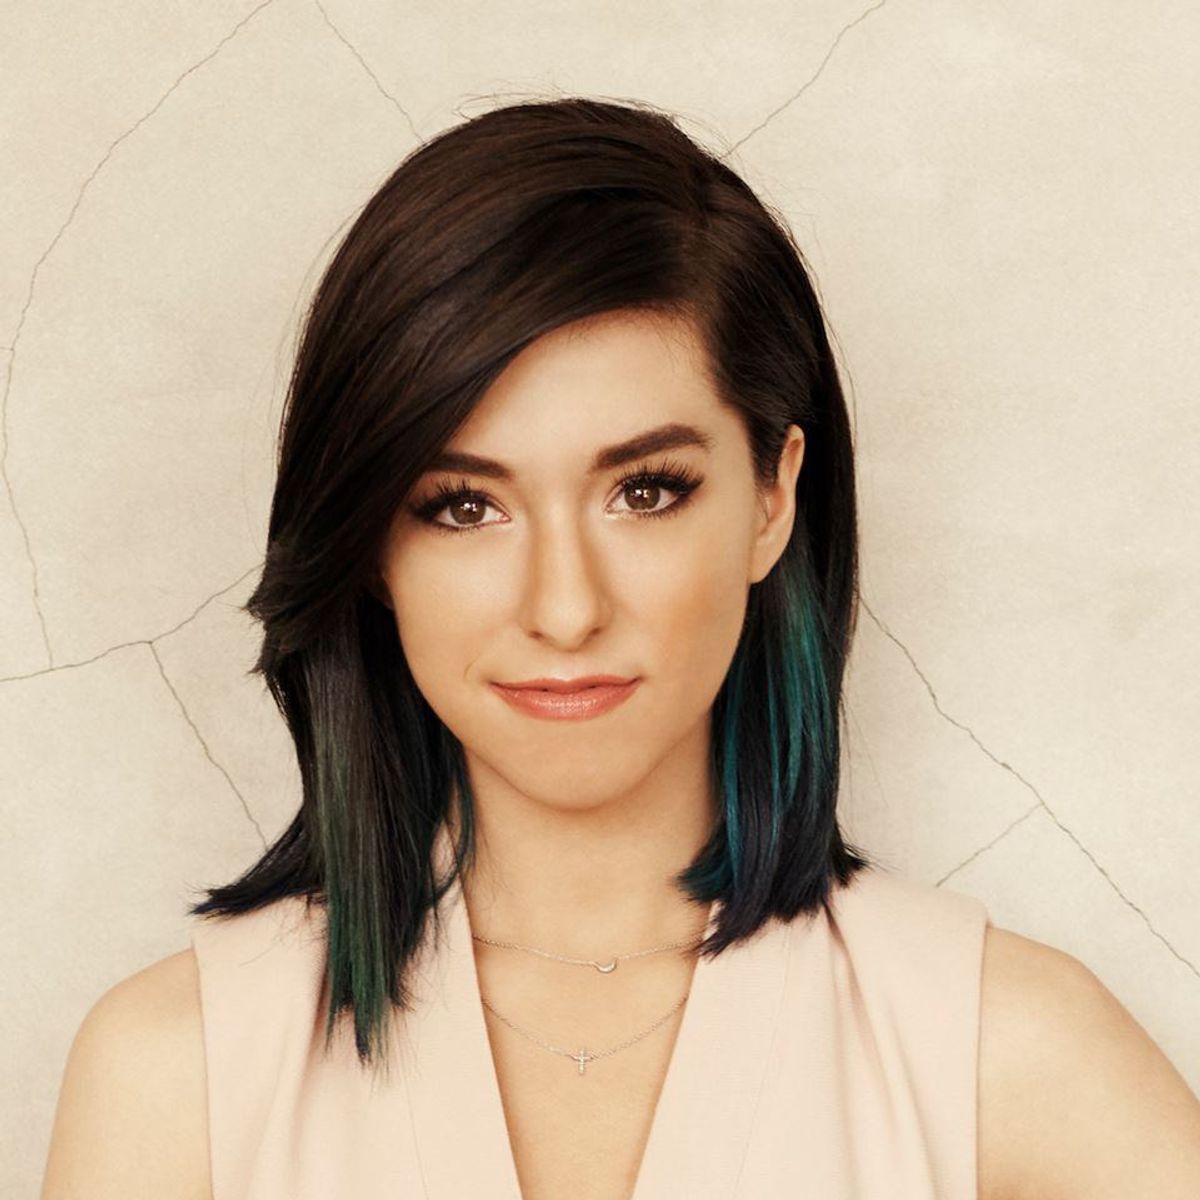 Why Christina Grimmie's Death Impacted Me